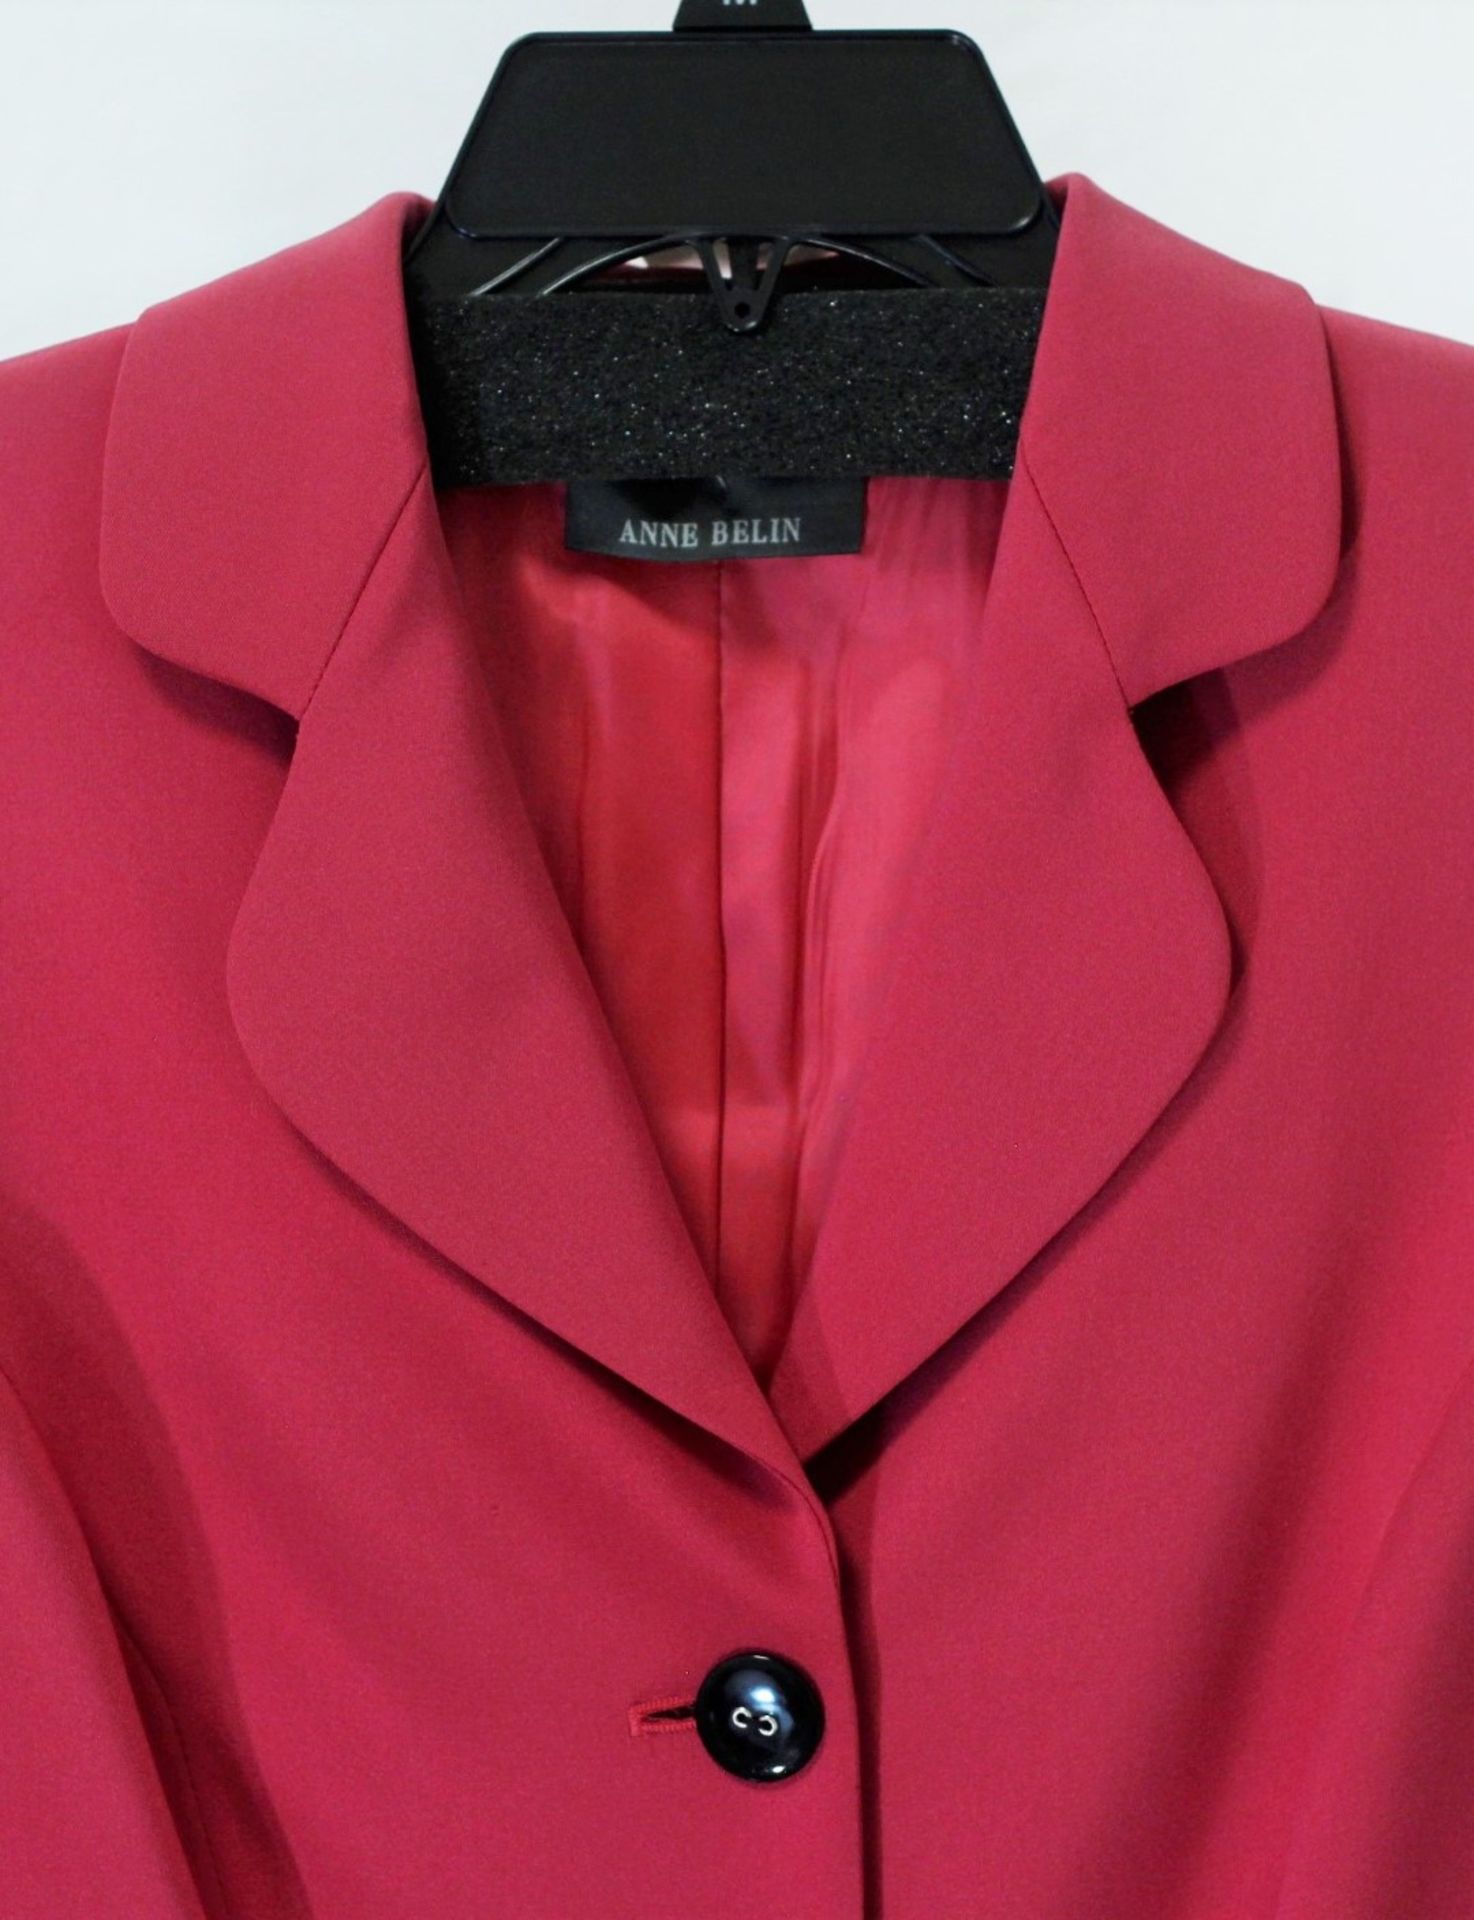 1 x Anne Belin Fuscia Jacket - Size: 18 - Material: 100% Silk - From a High End Clothing Boutique In